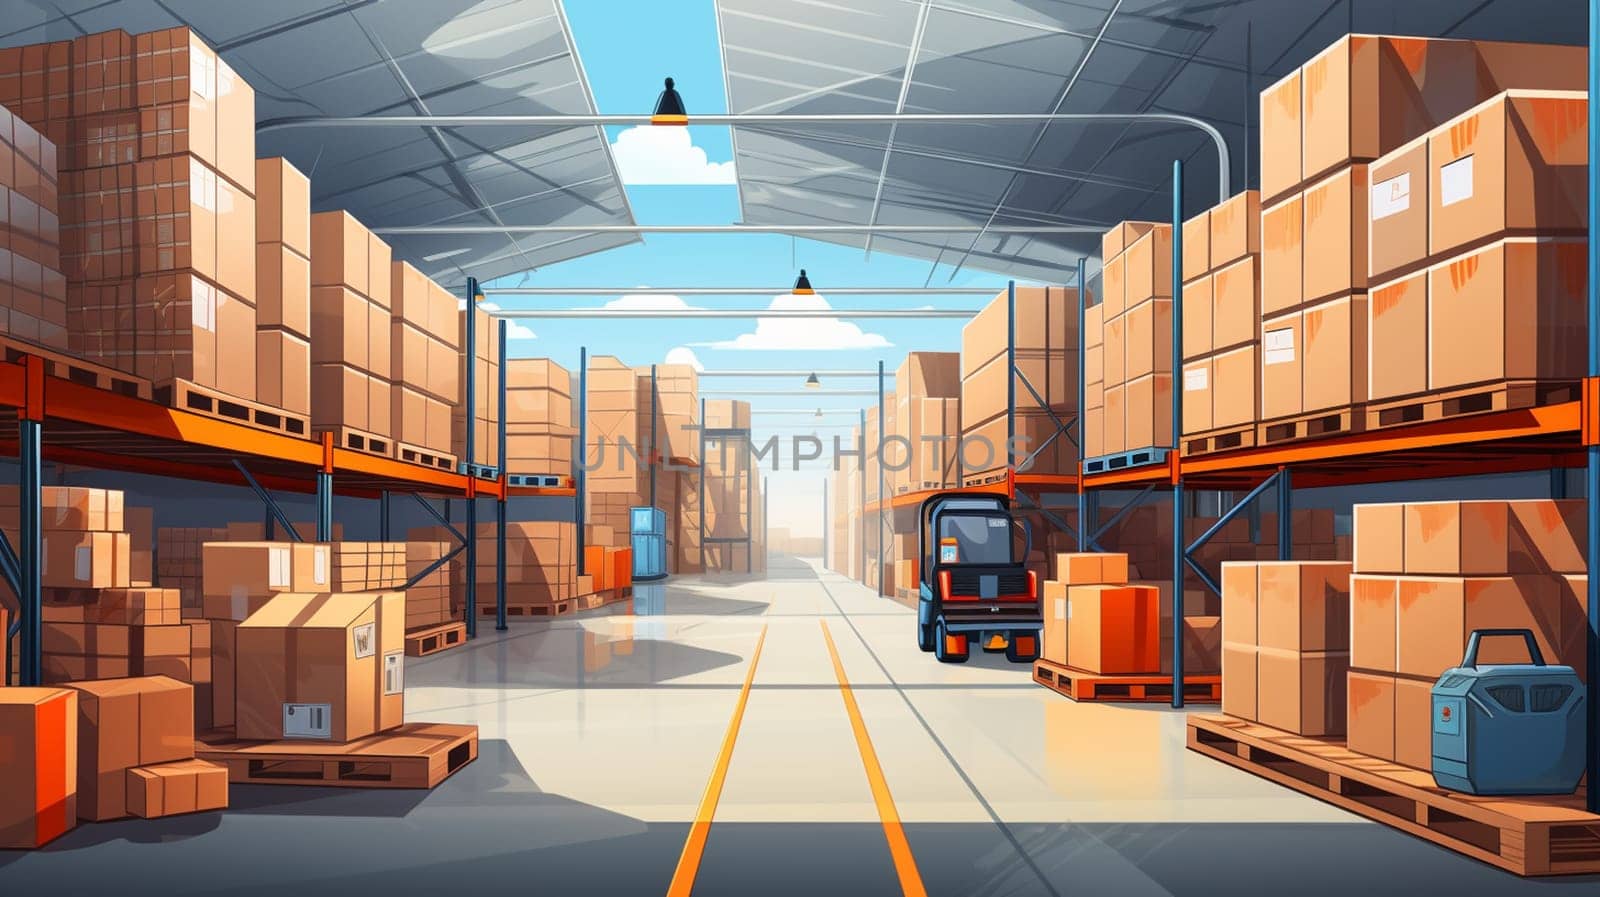 Forklift preparing products for shipment. Warehouse distribution concept. 3d rendering